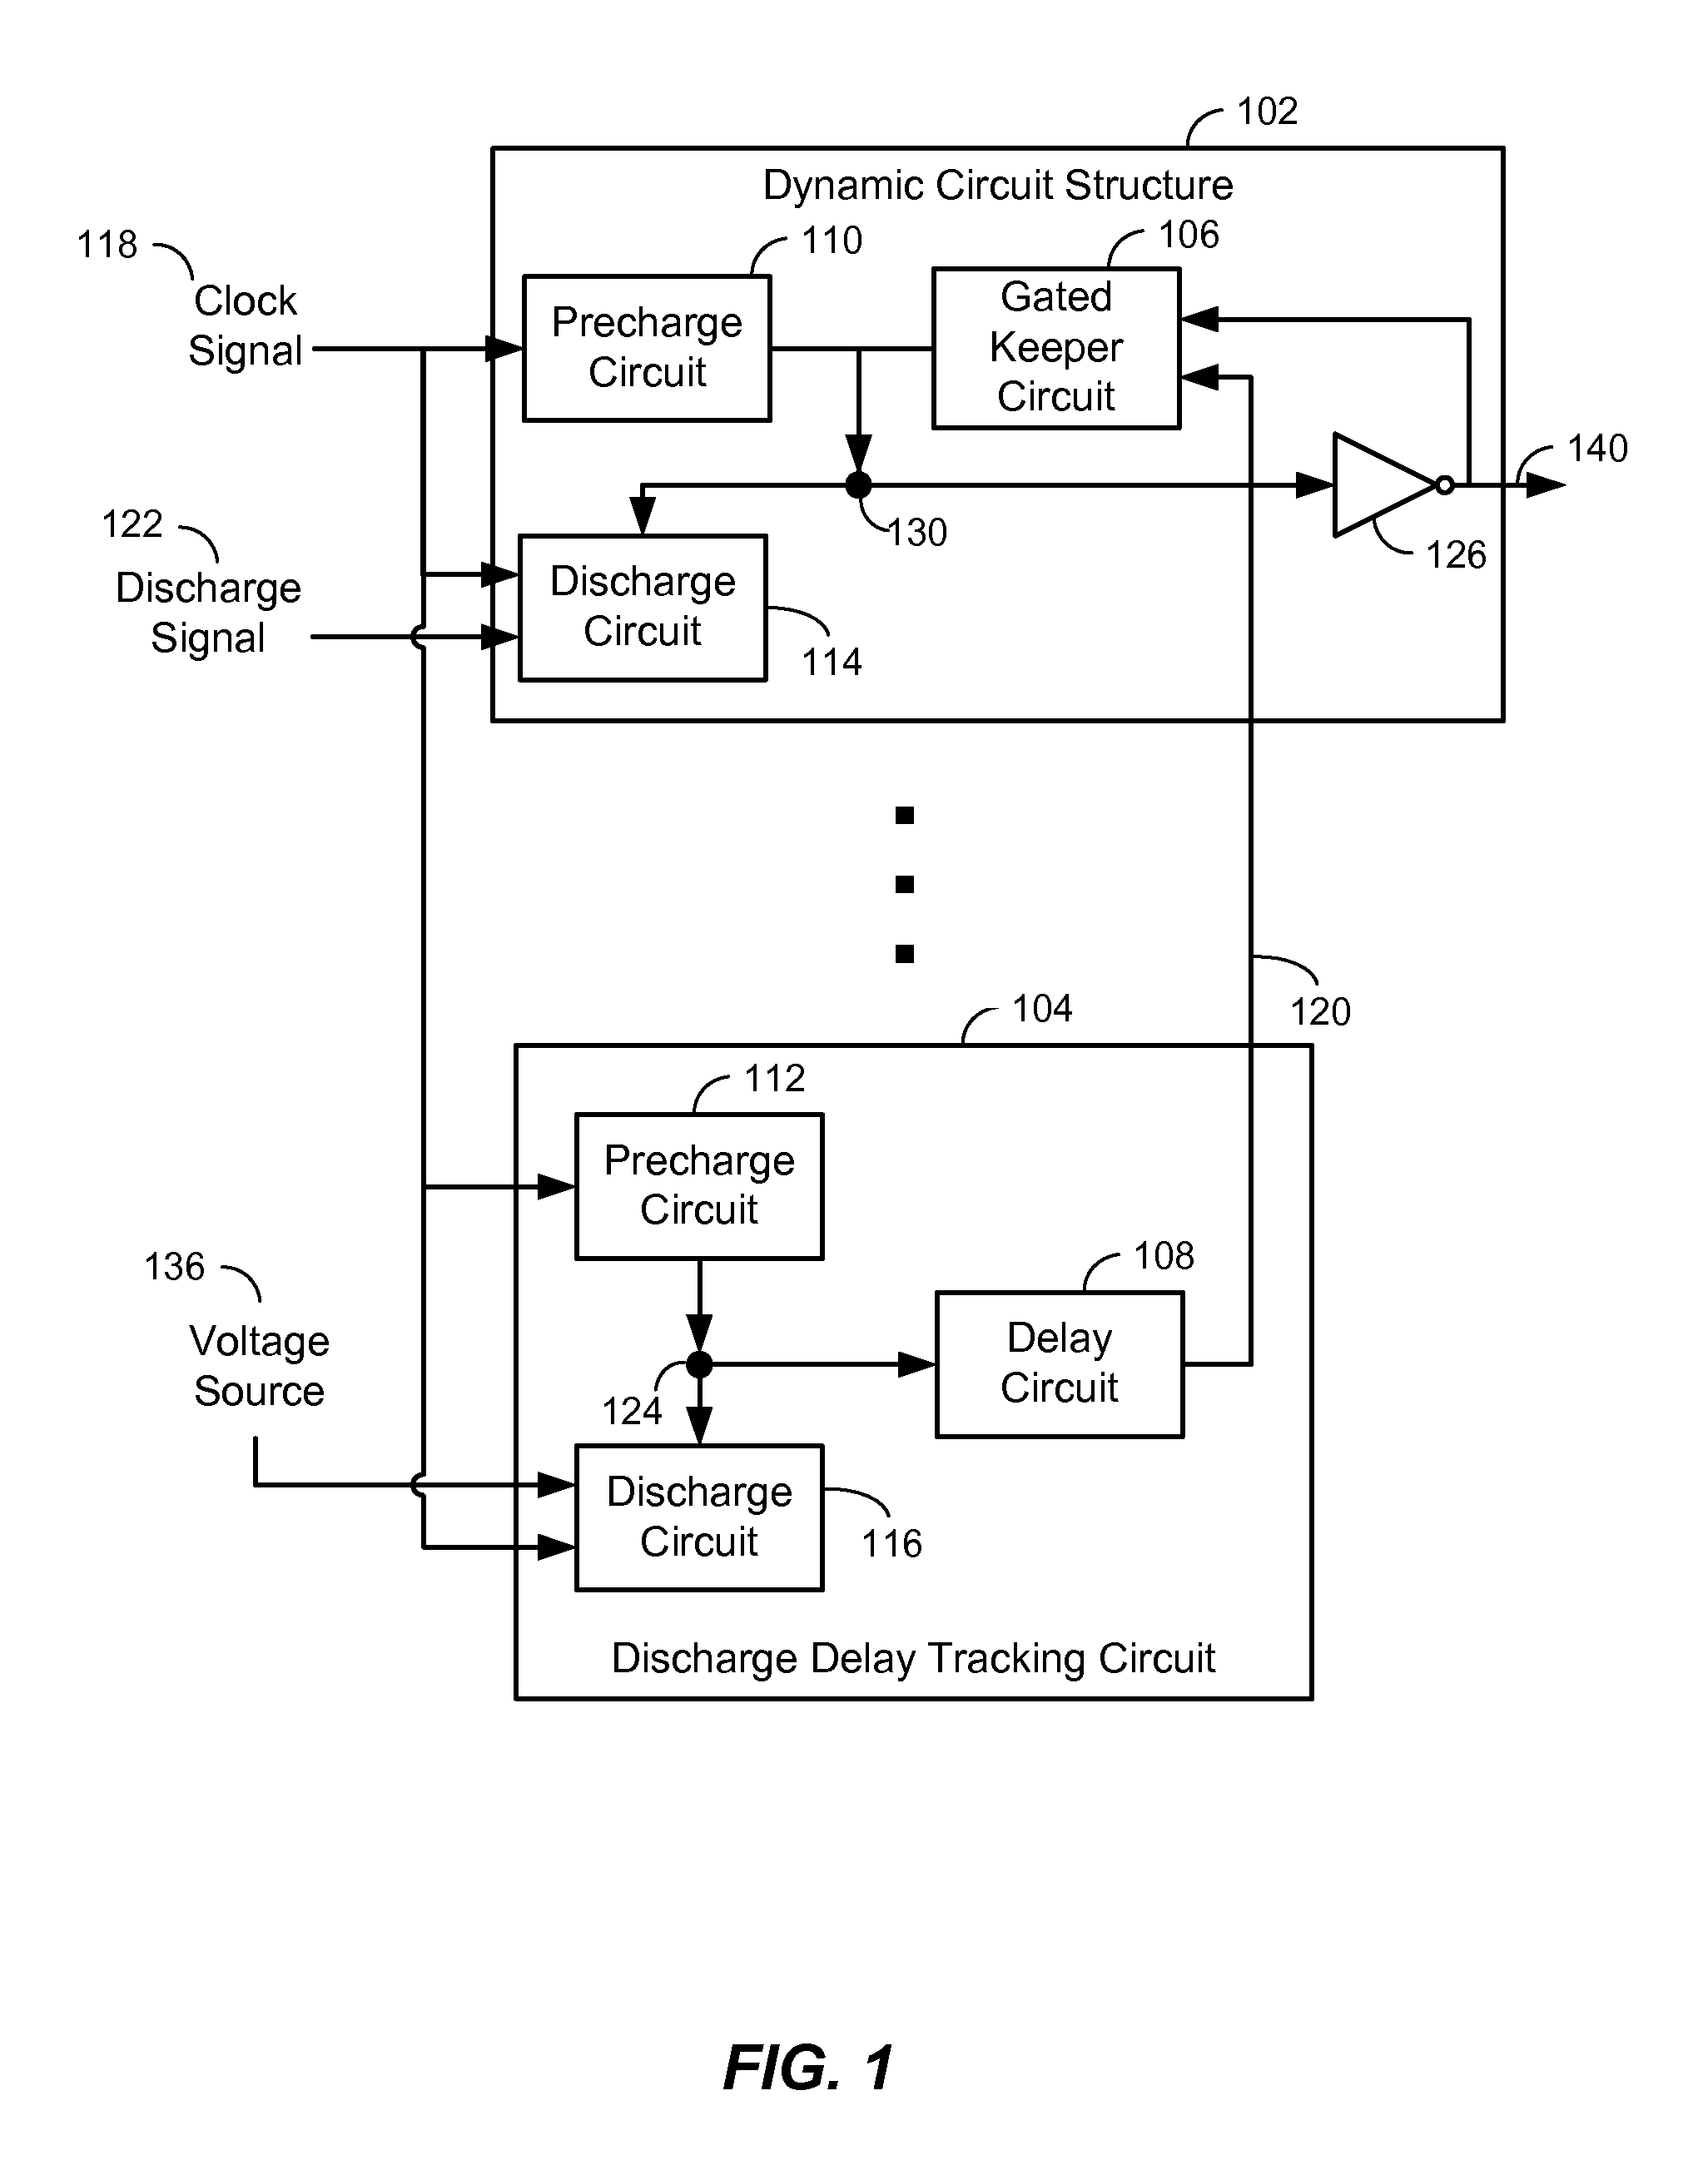 Voltage Level Shifter with Dynamic Circuit Structure having Discharge Delay Tracking